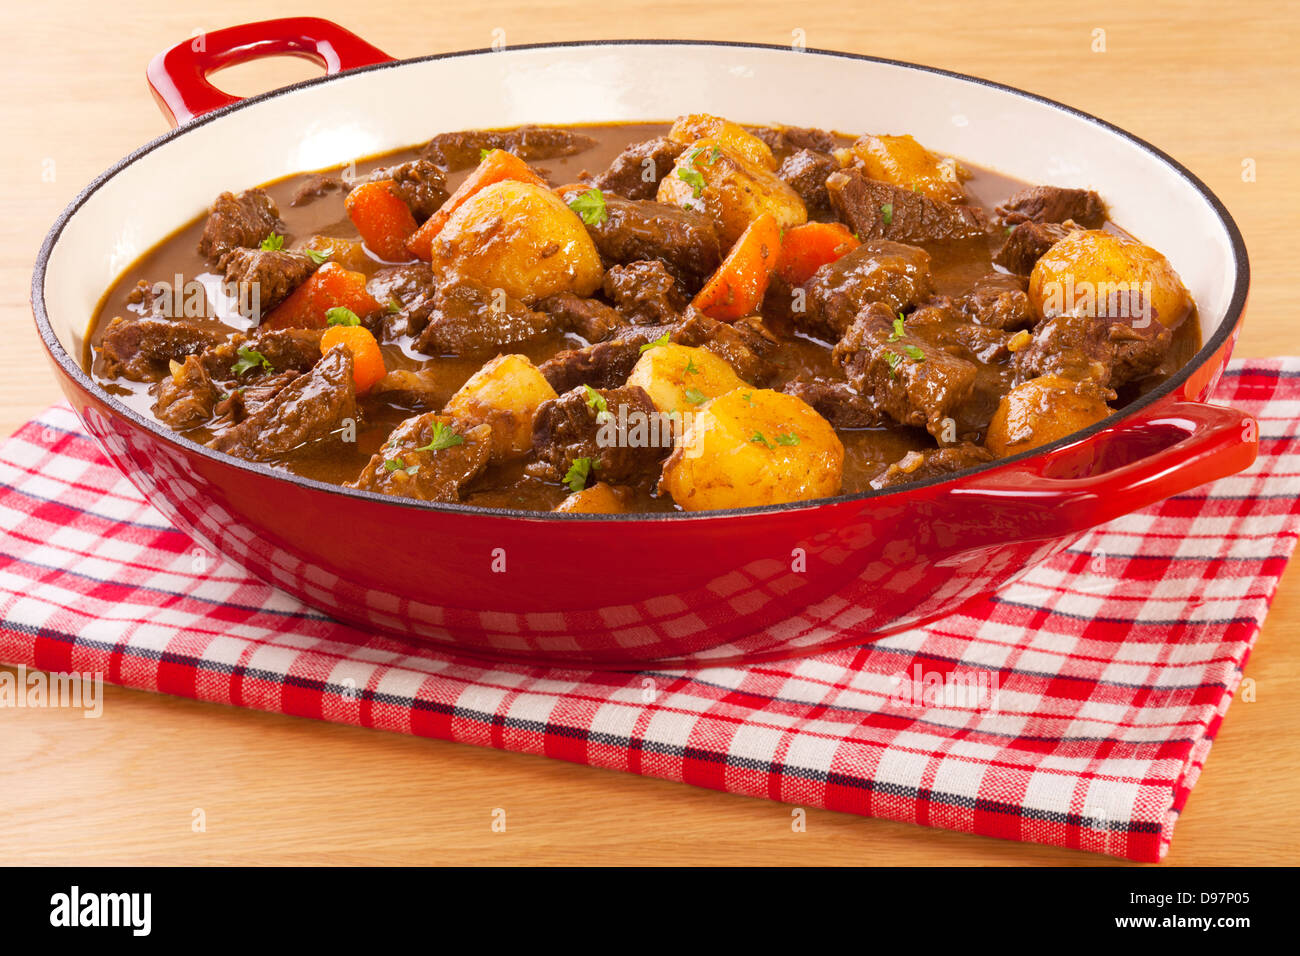 Stew with Carrots and Potatoes - a simple stew in a red pot, with carrots and potatoes. Stock Photo